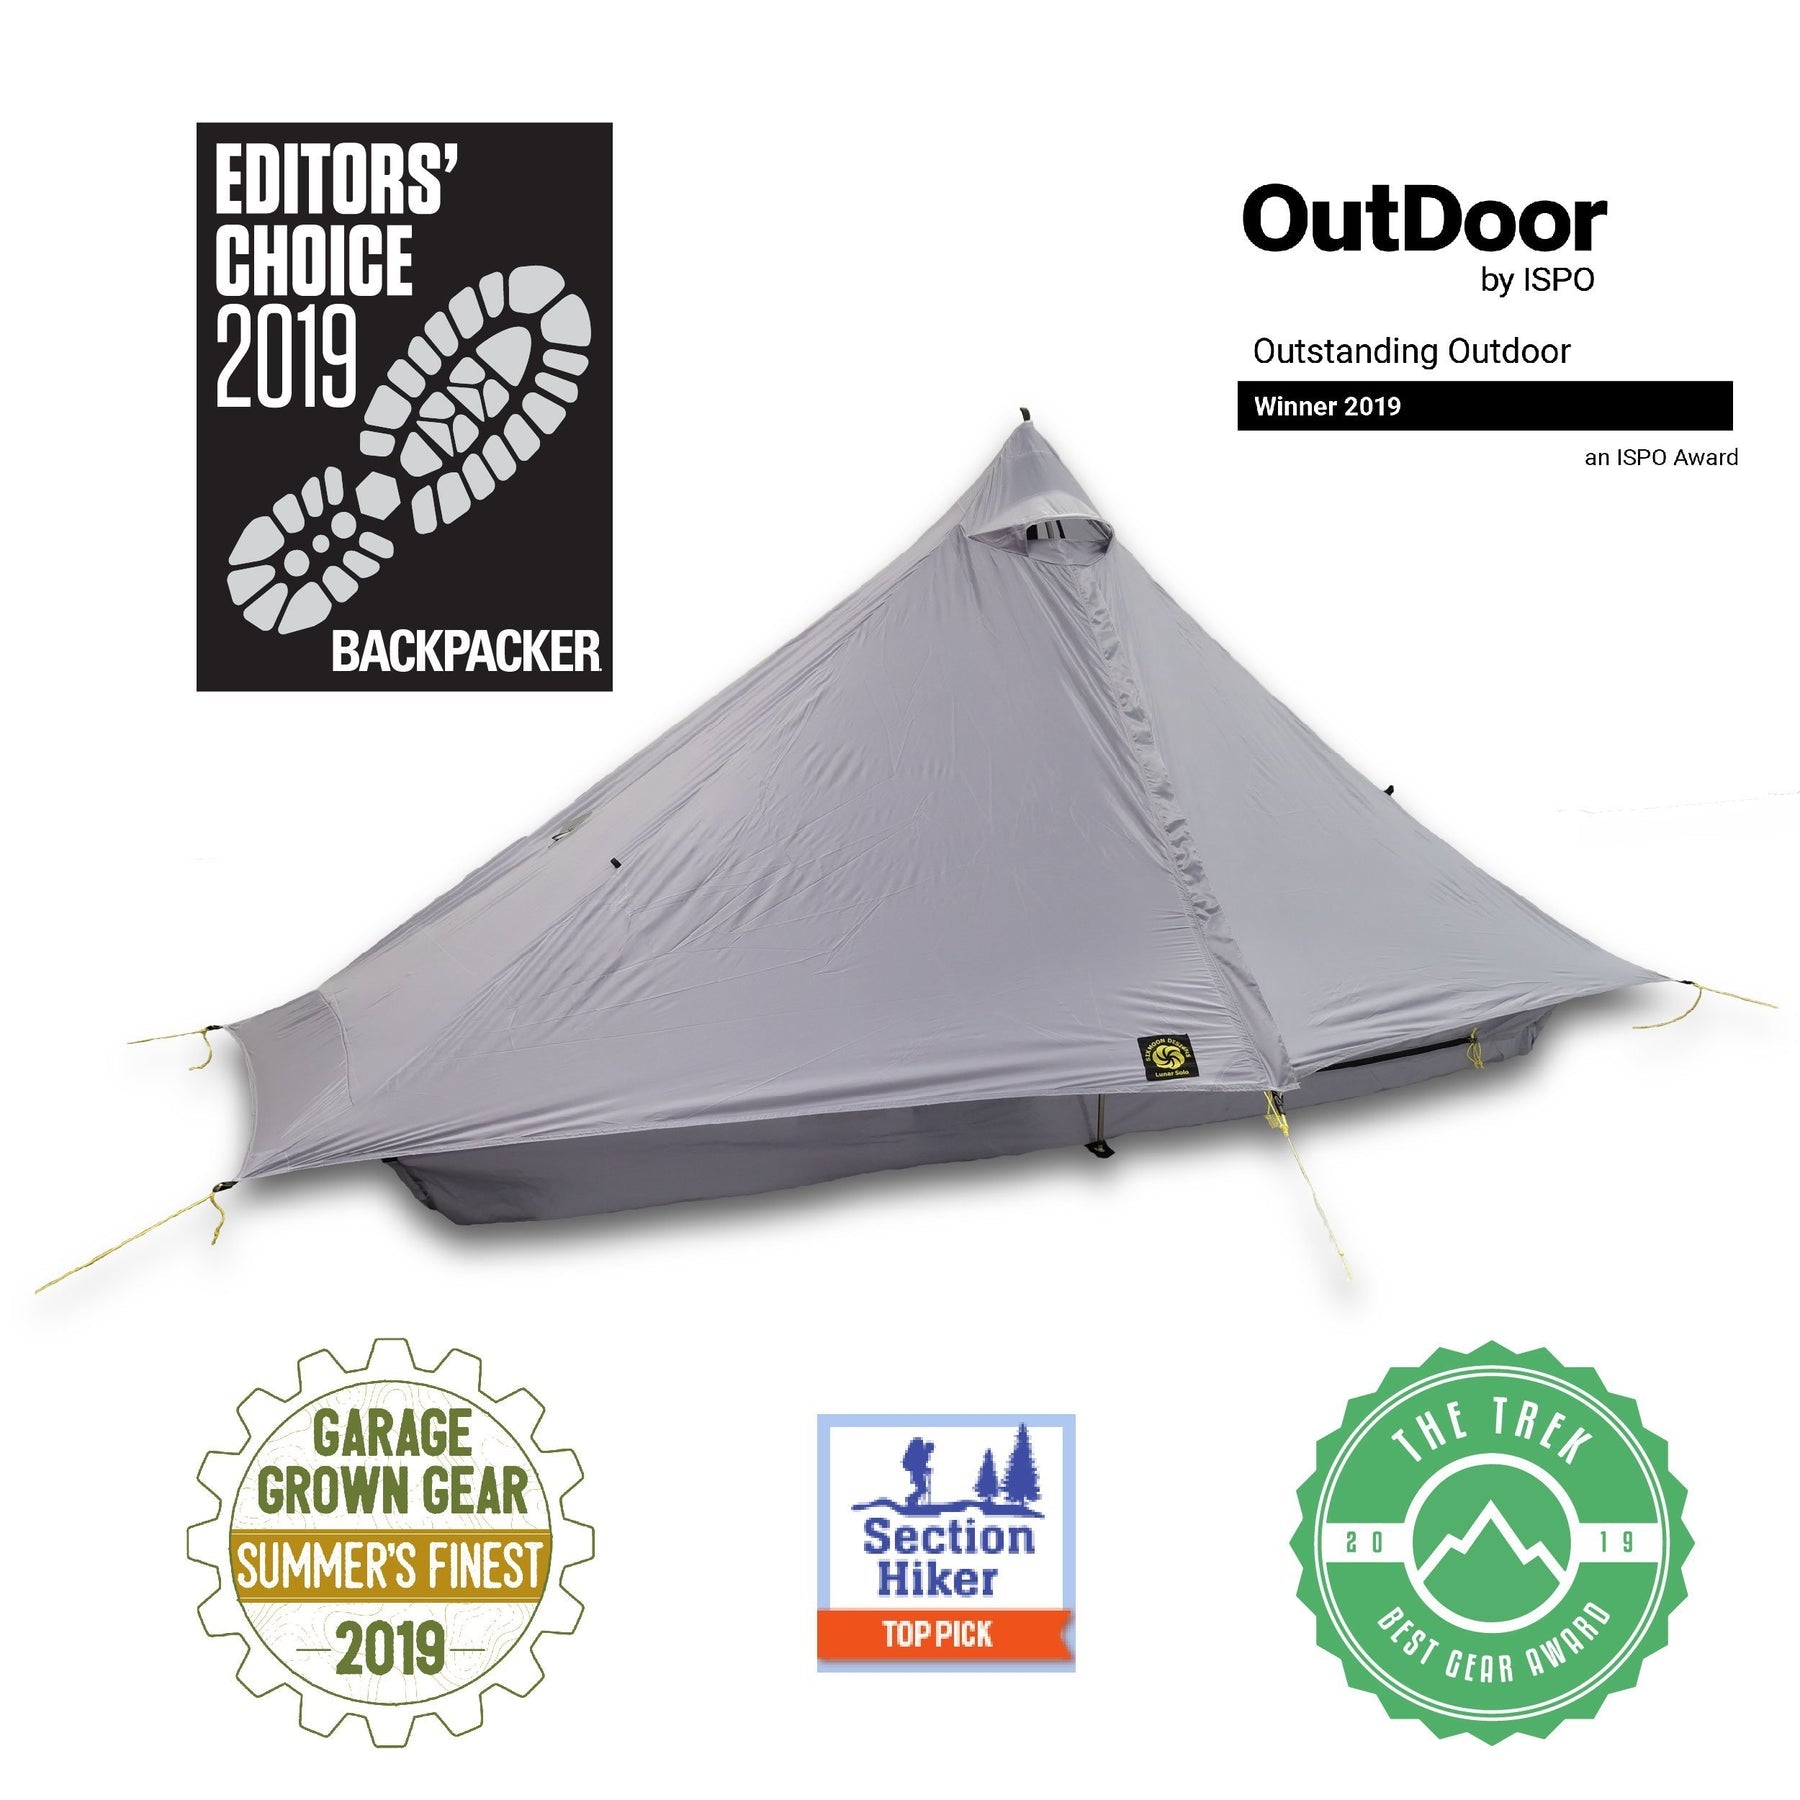 Lunar Solo Backpacking Tent